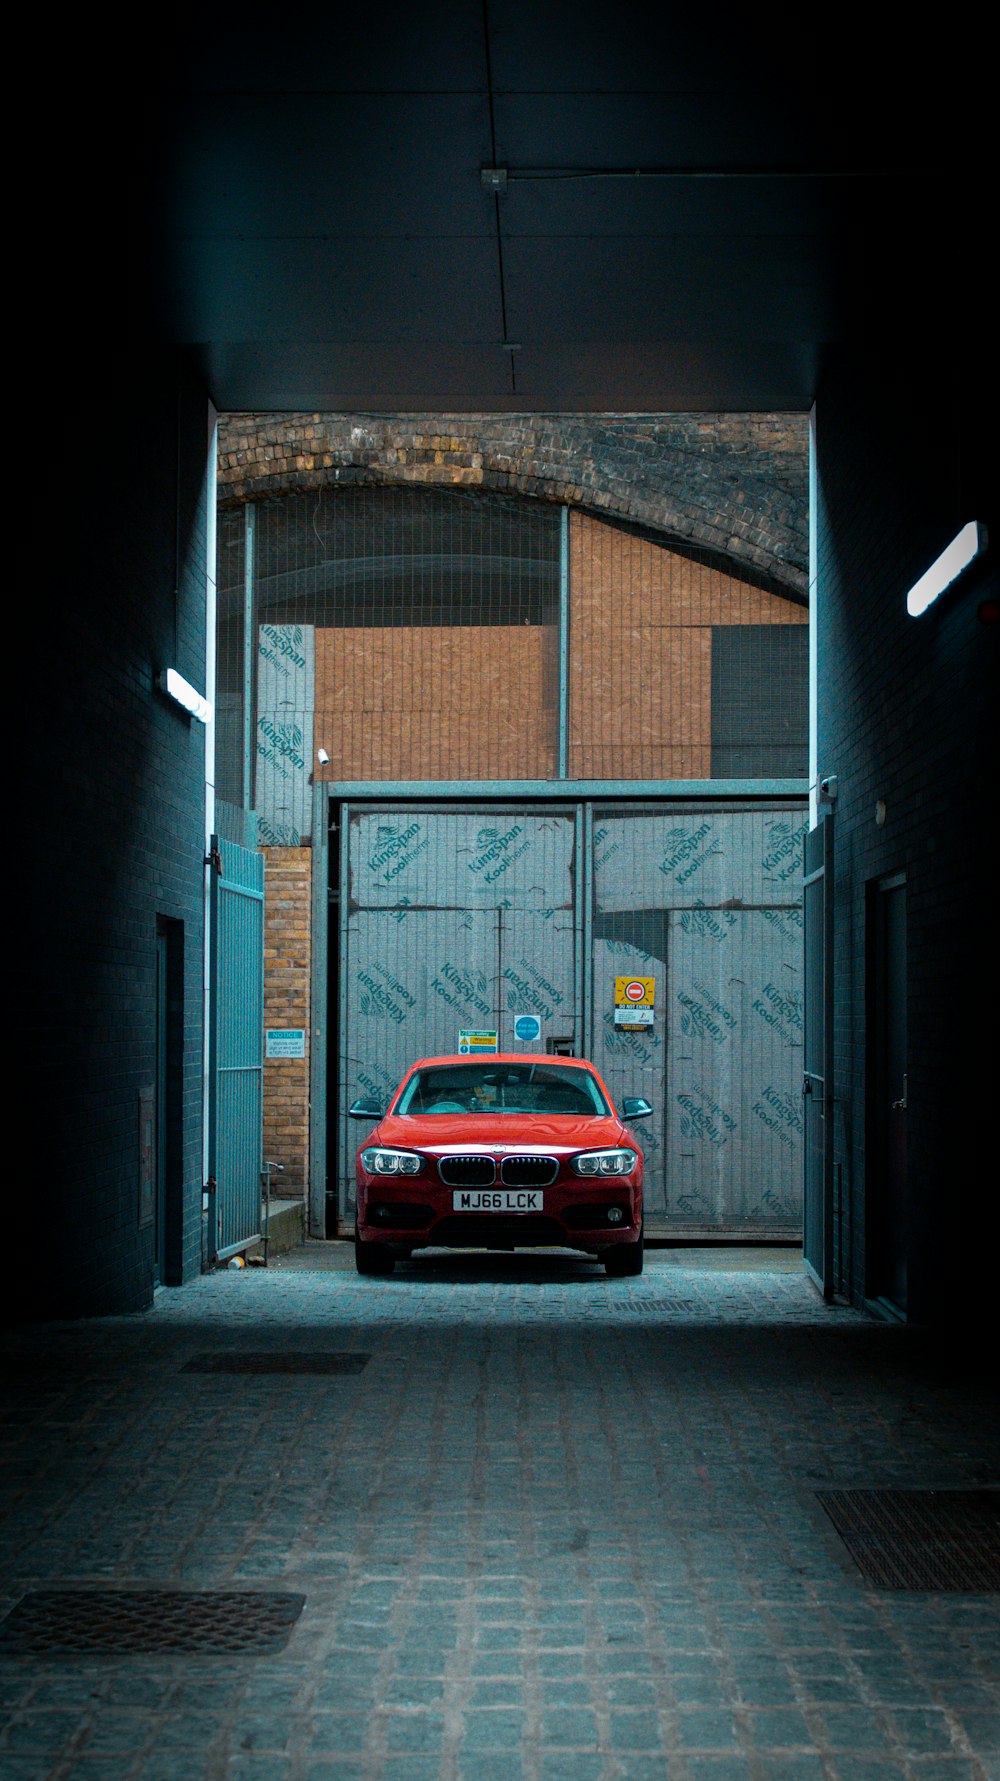 a red car is parked in an alley